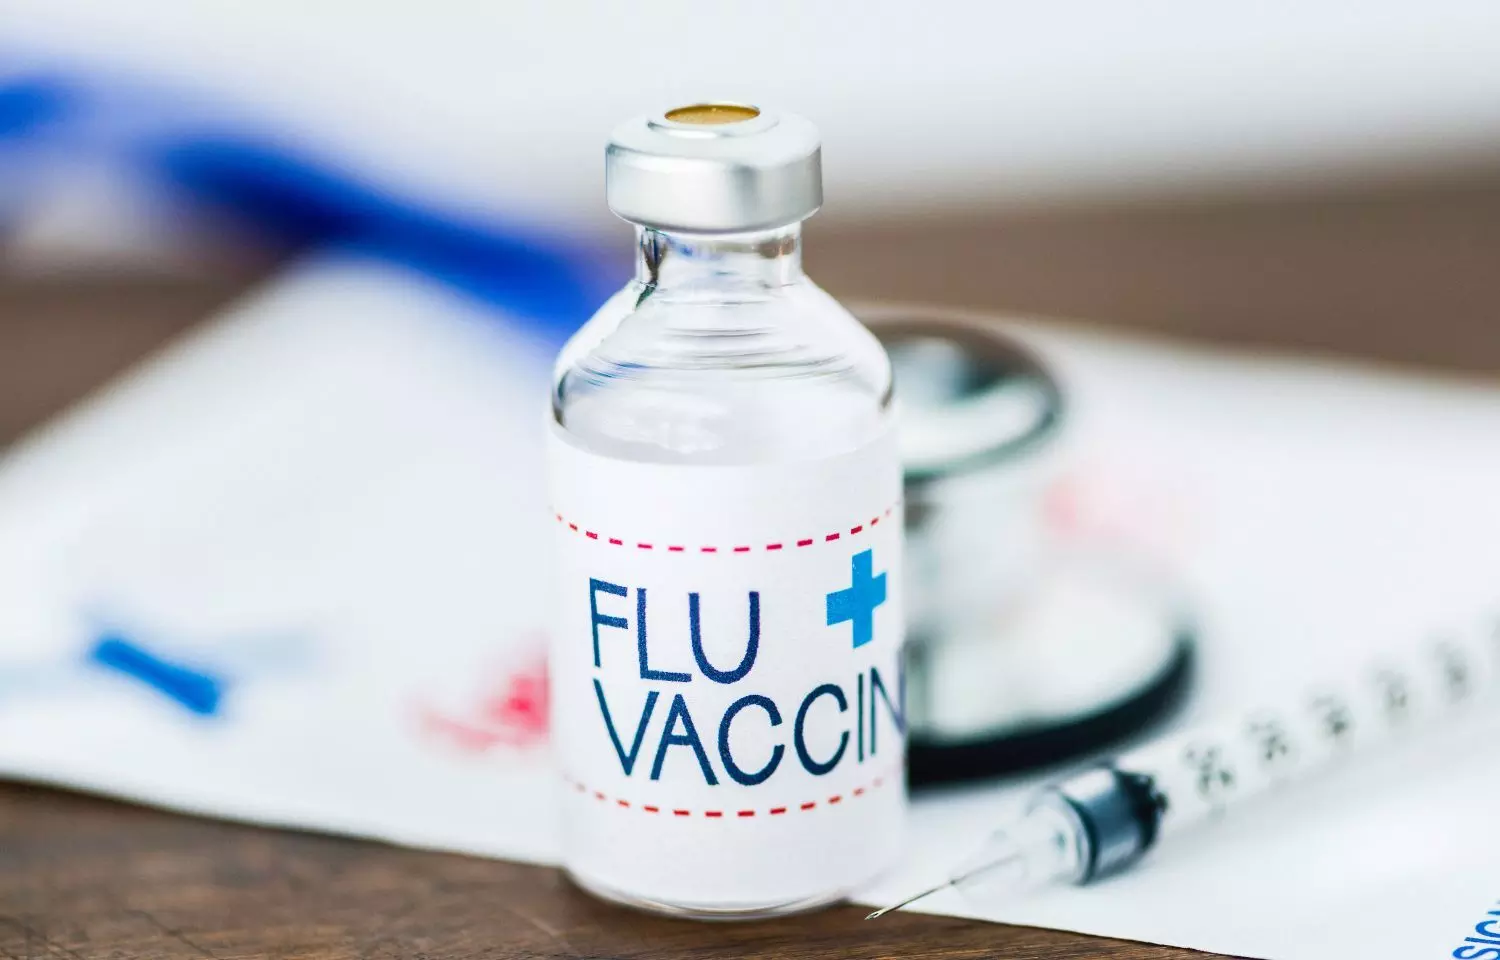 Administration of annual flu shot may lower risk of ischemic stroke